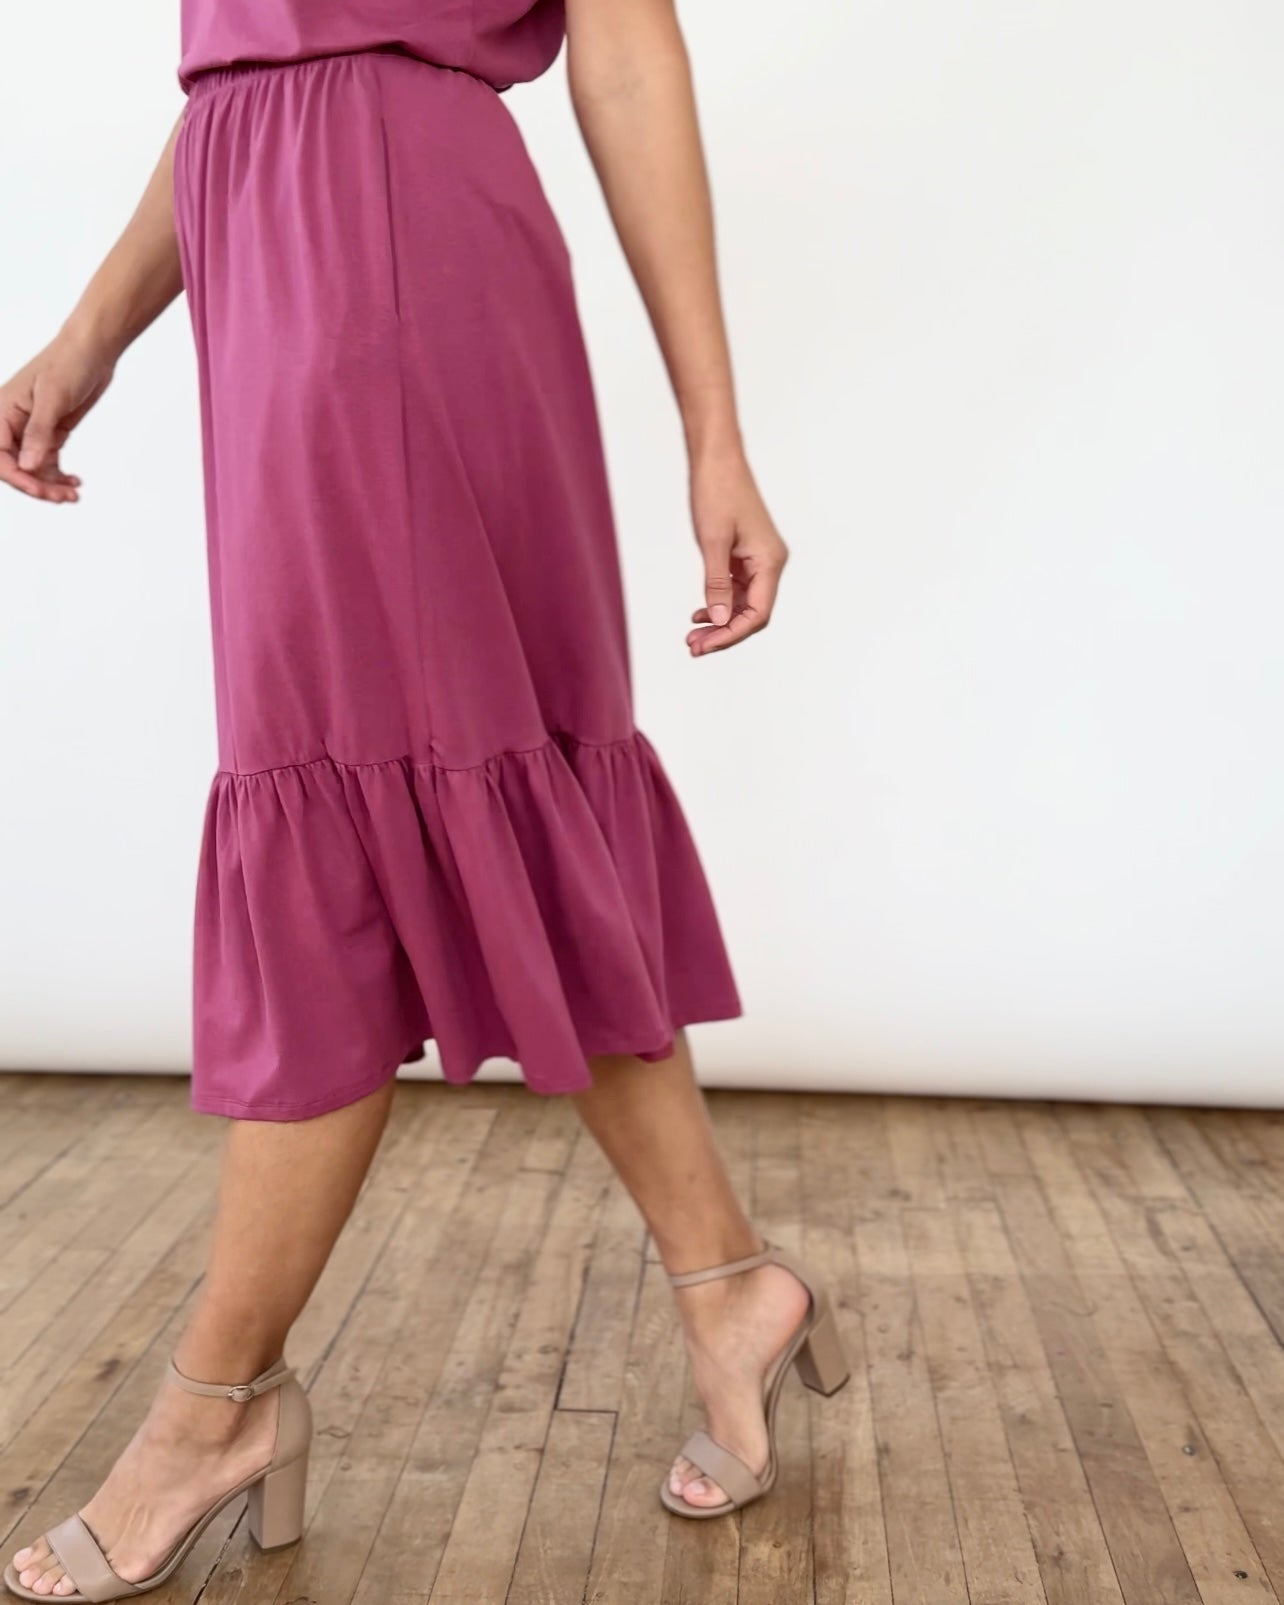 CASSIDY skirt in Mauve Berry